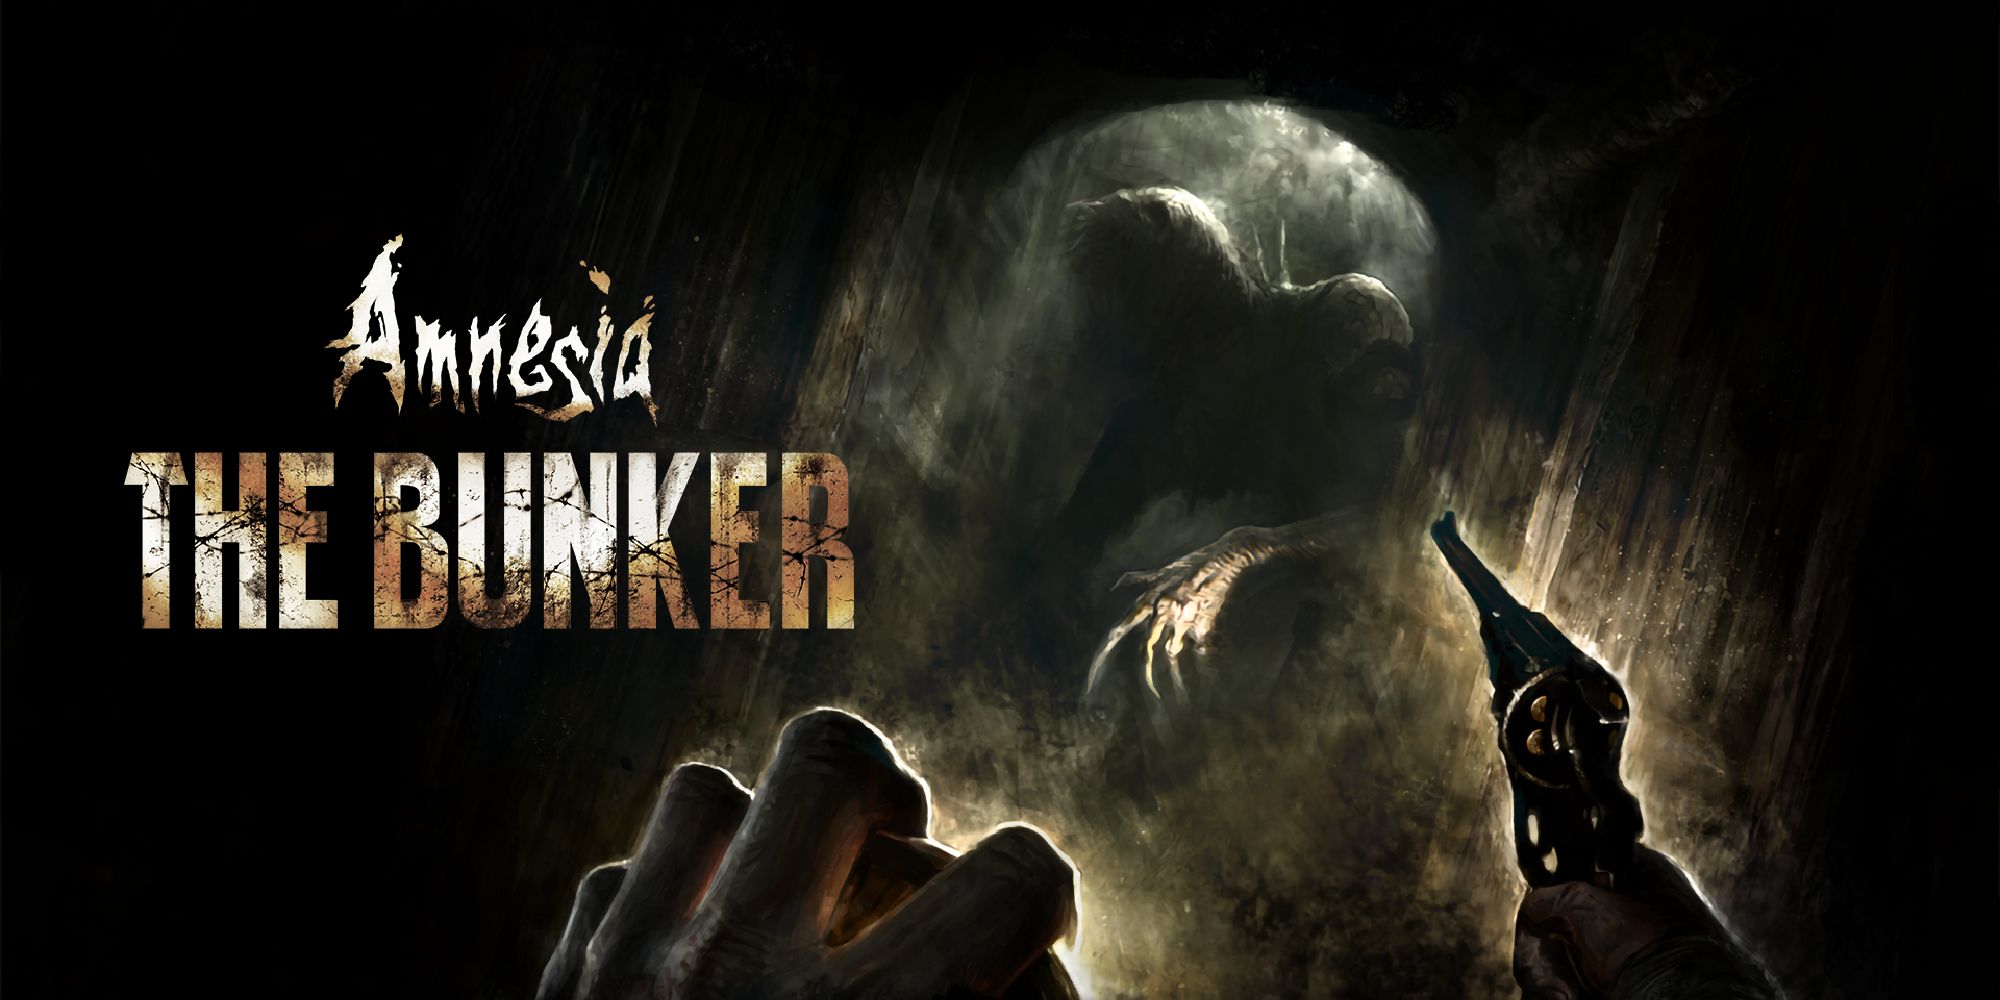 Thumbnail for the game amnesia the bunkerm showing a monster lurching from the dark, two hands holding a gun and light source. 